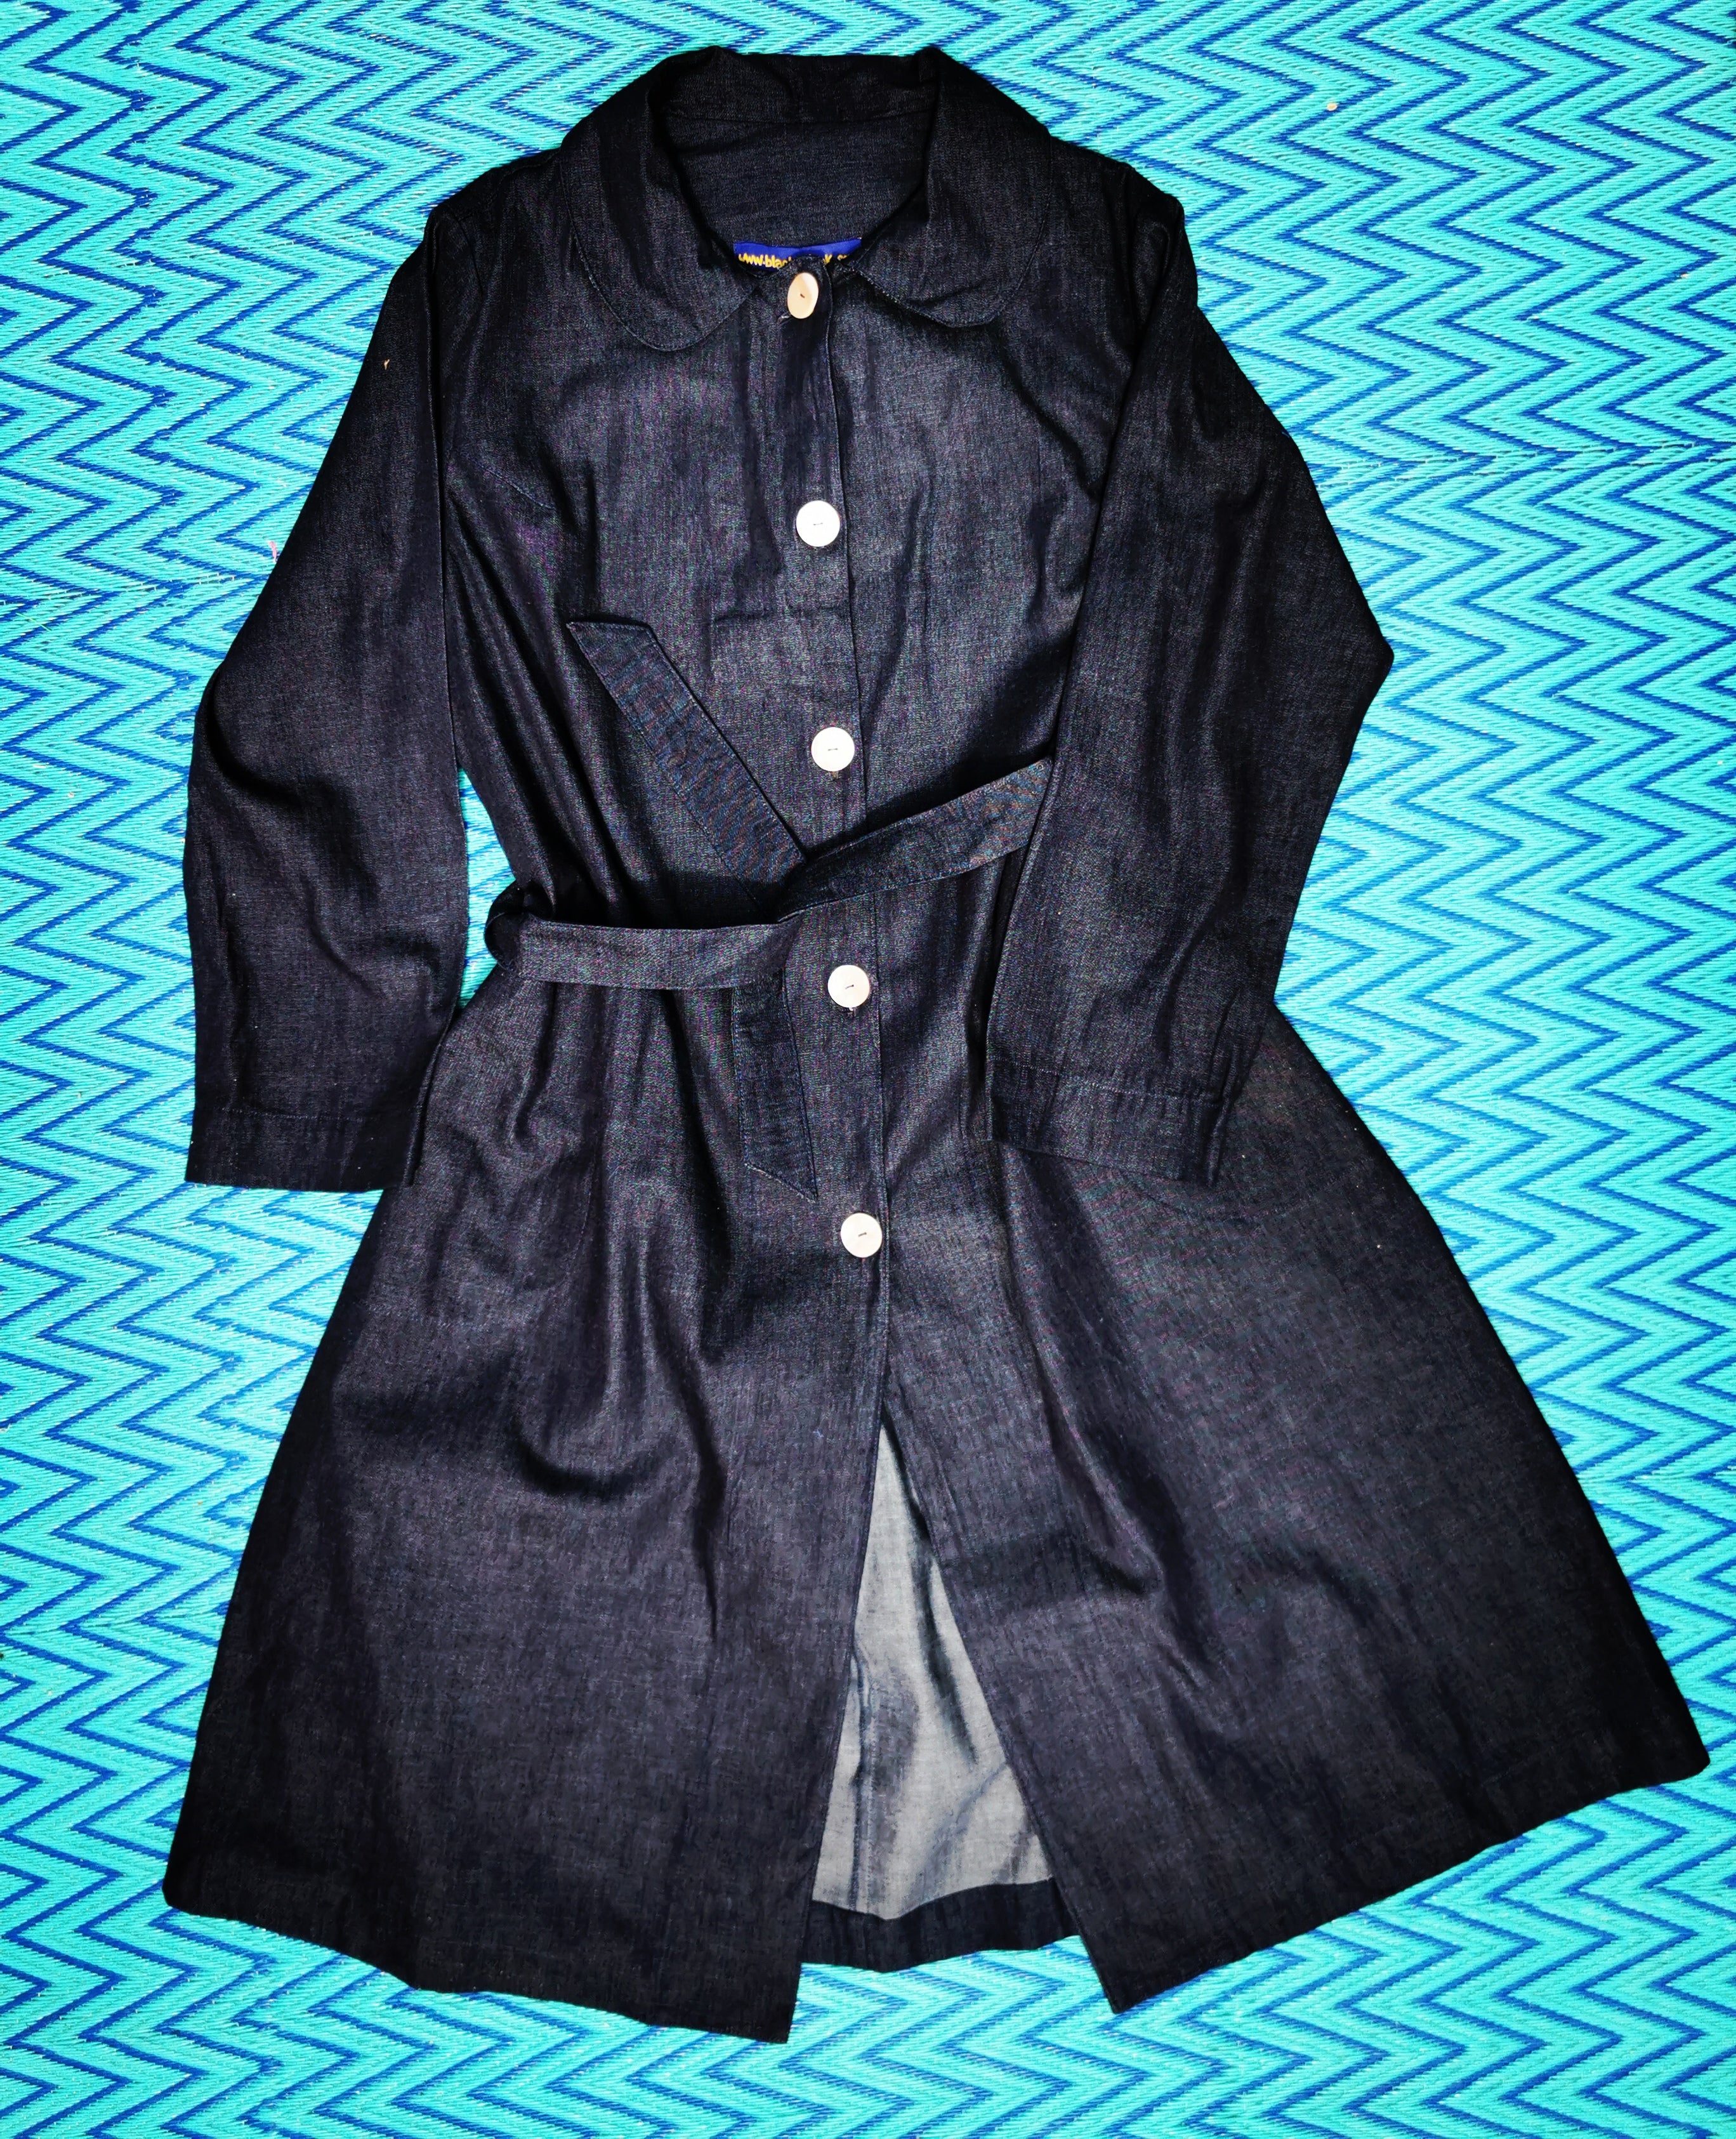 Trench coat - Cotton drill and denim